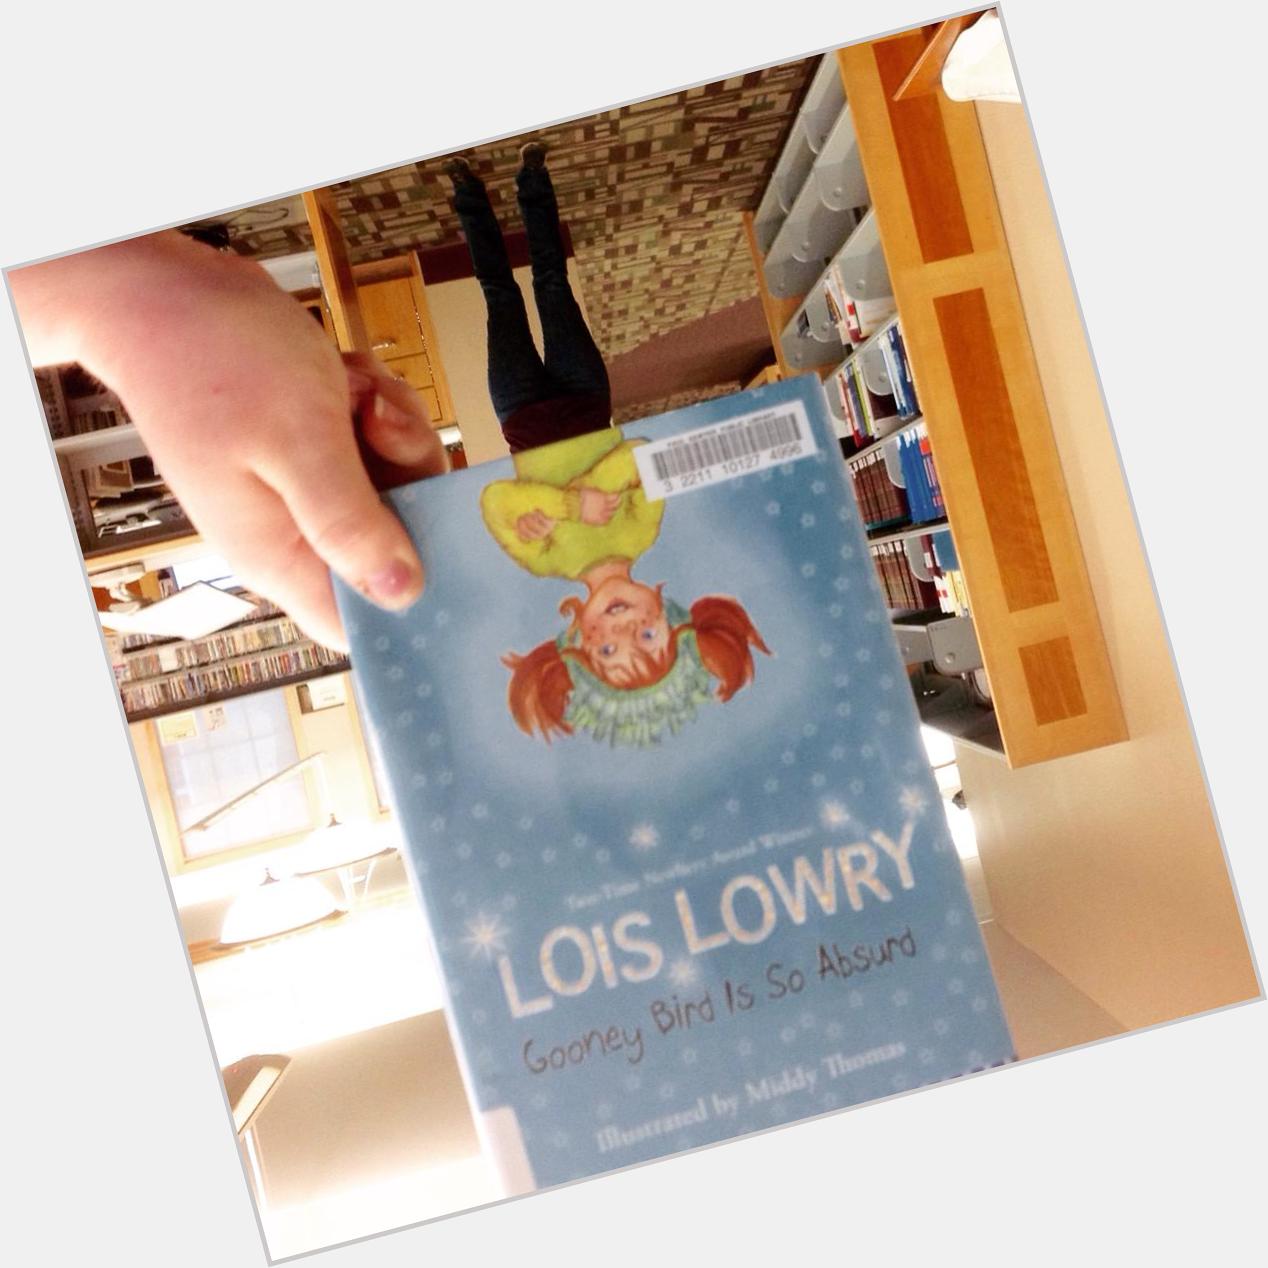 Happy to you and a happy birthday to Lois Lowry!  